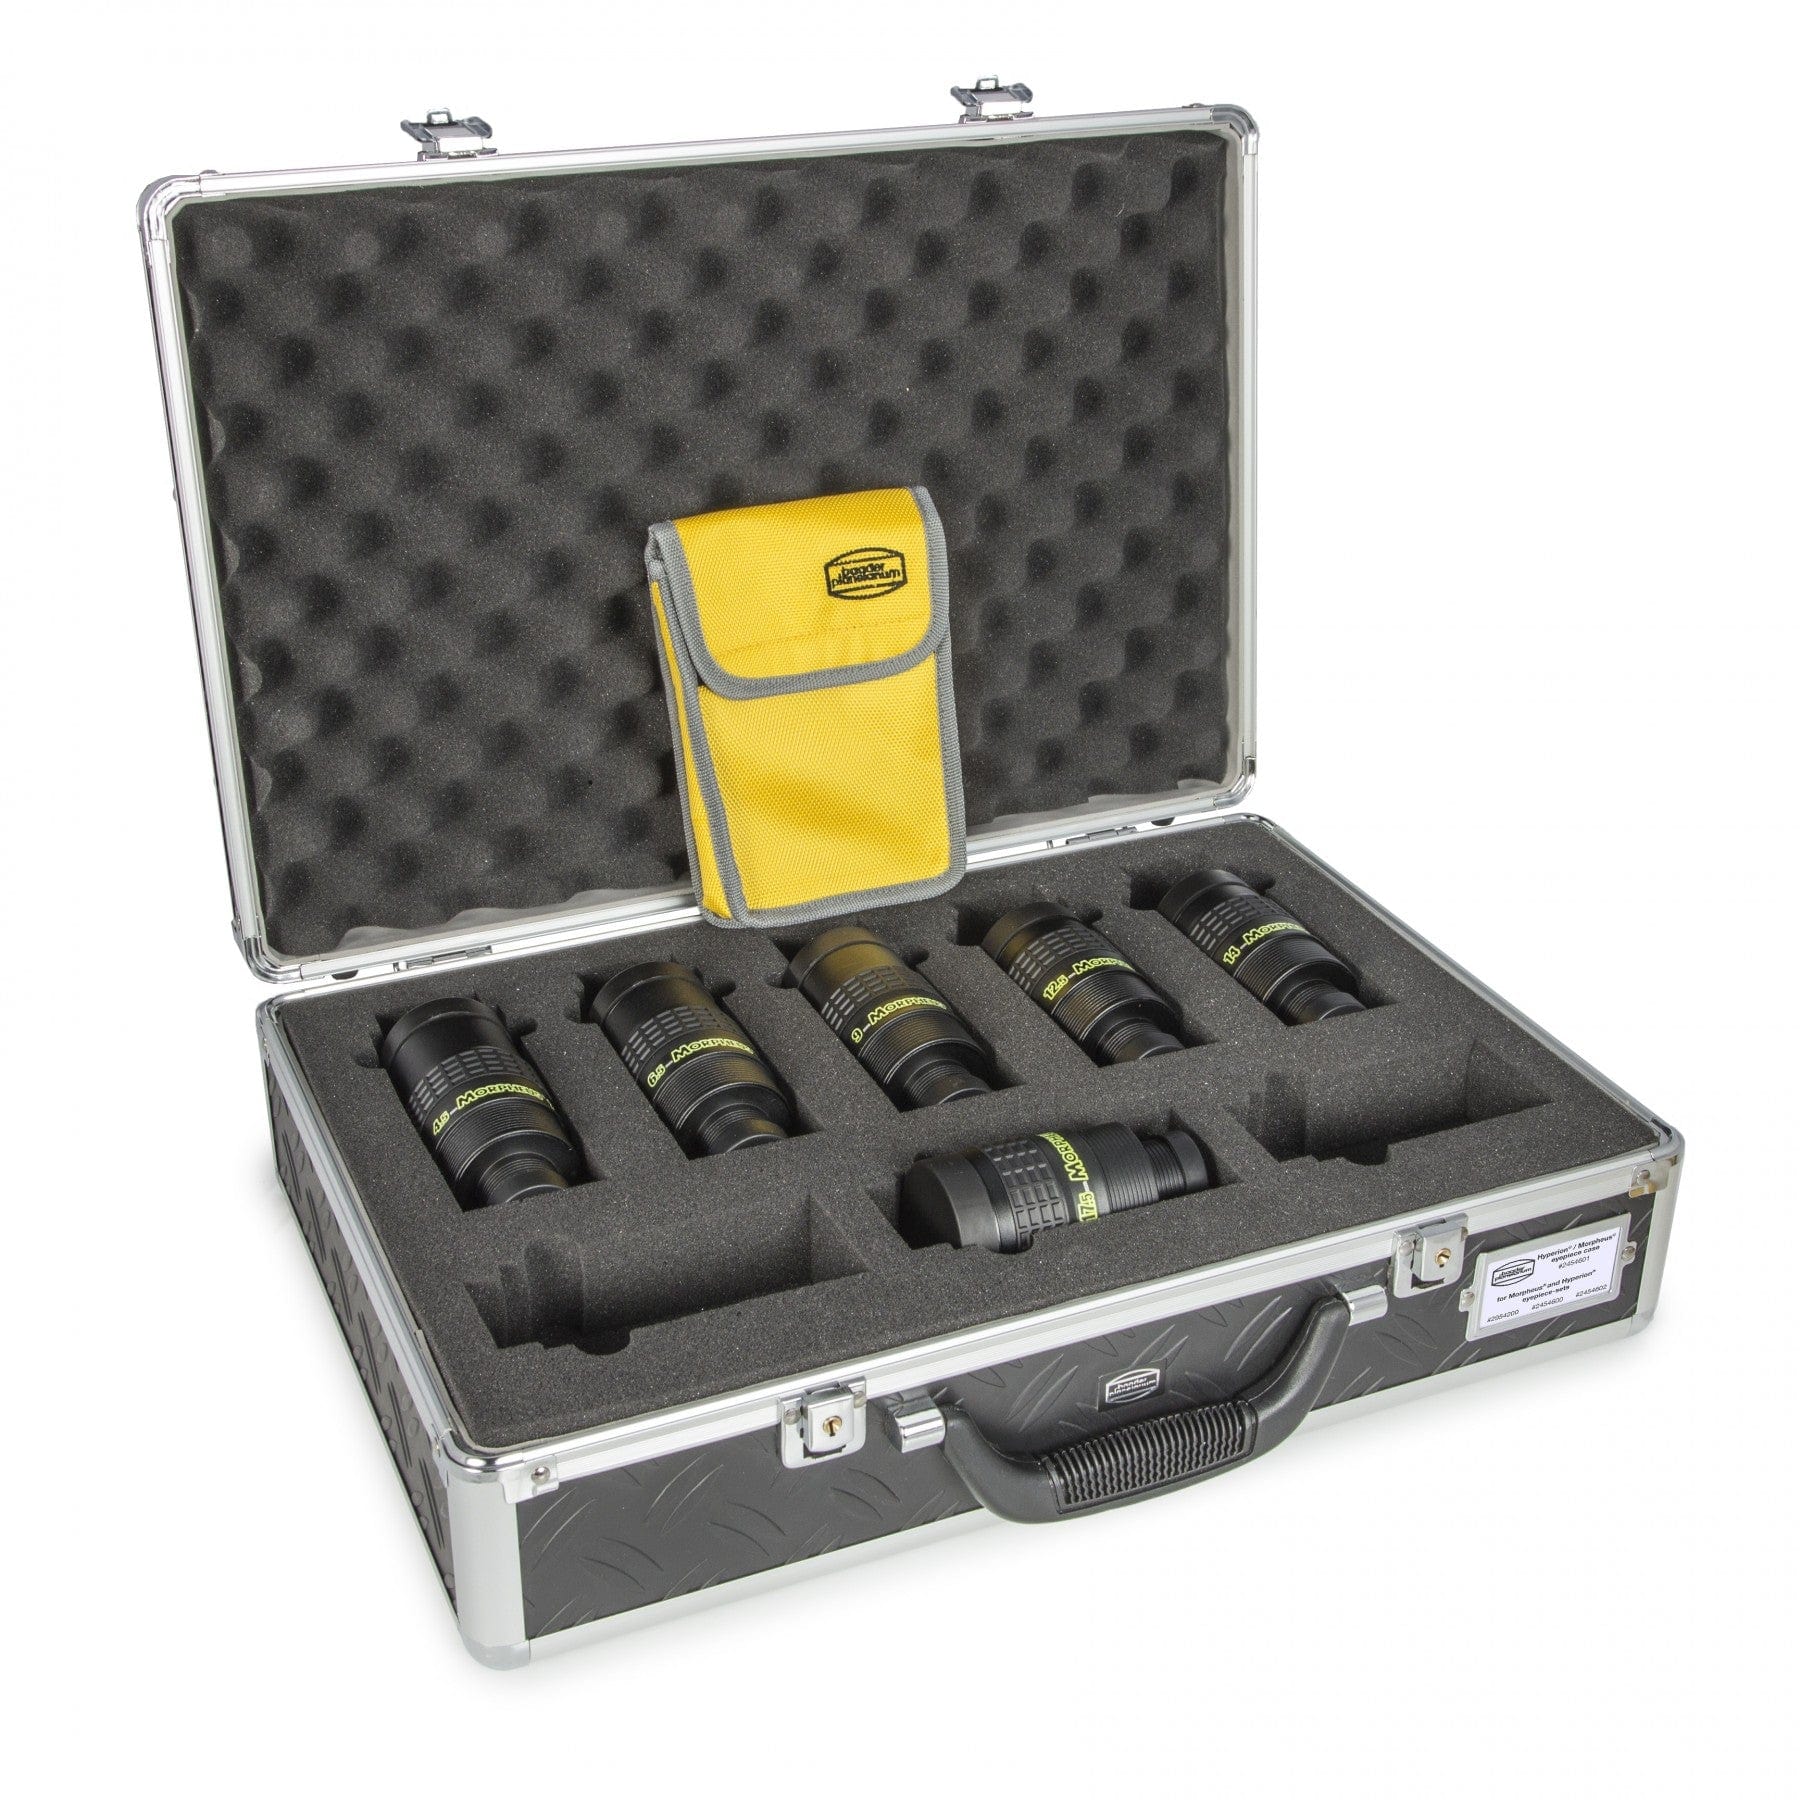 Baader Planetarium Eyepiece Baader Complete Morpheus 6 Piece Eyepiece Set - Includes Fitted Hardcase - 2954200